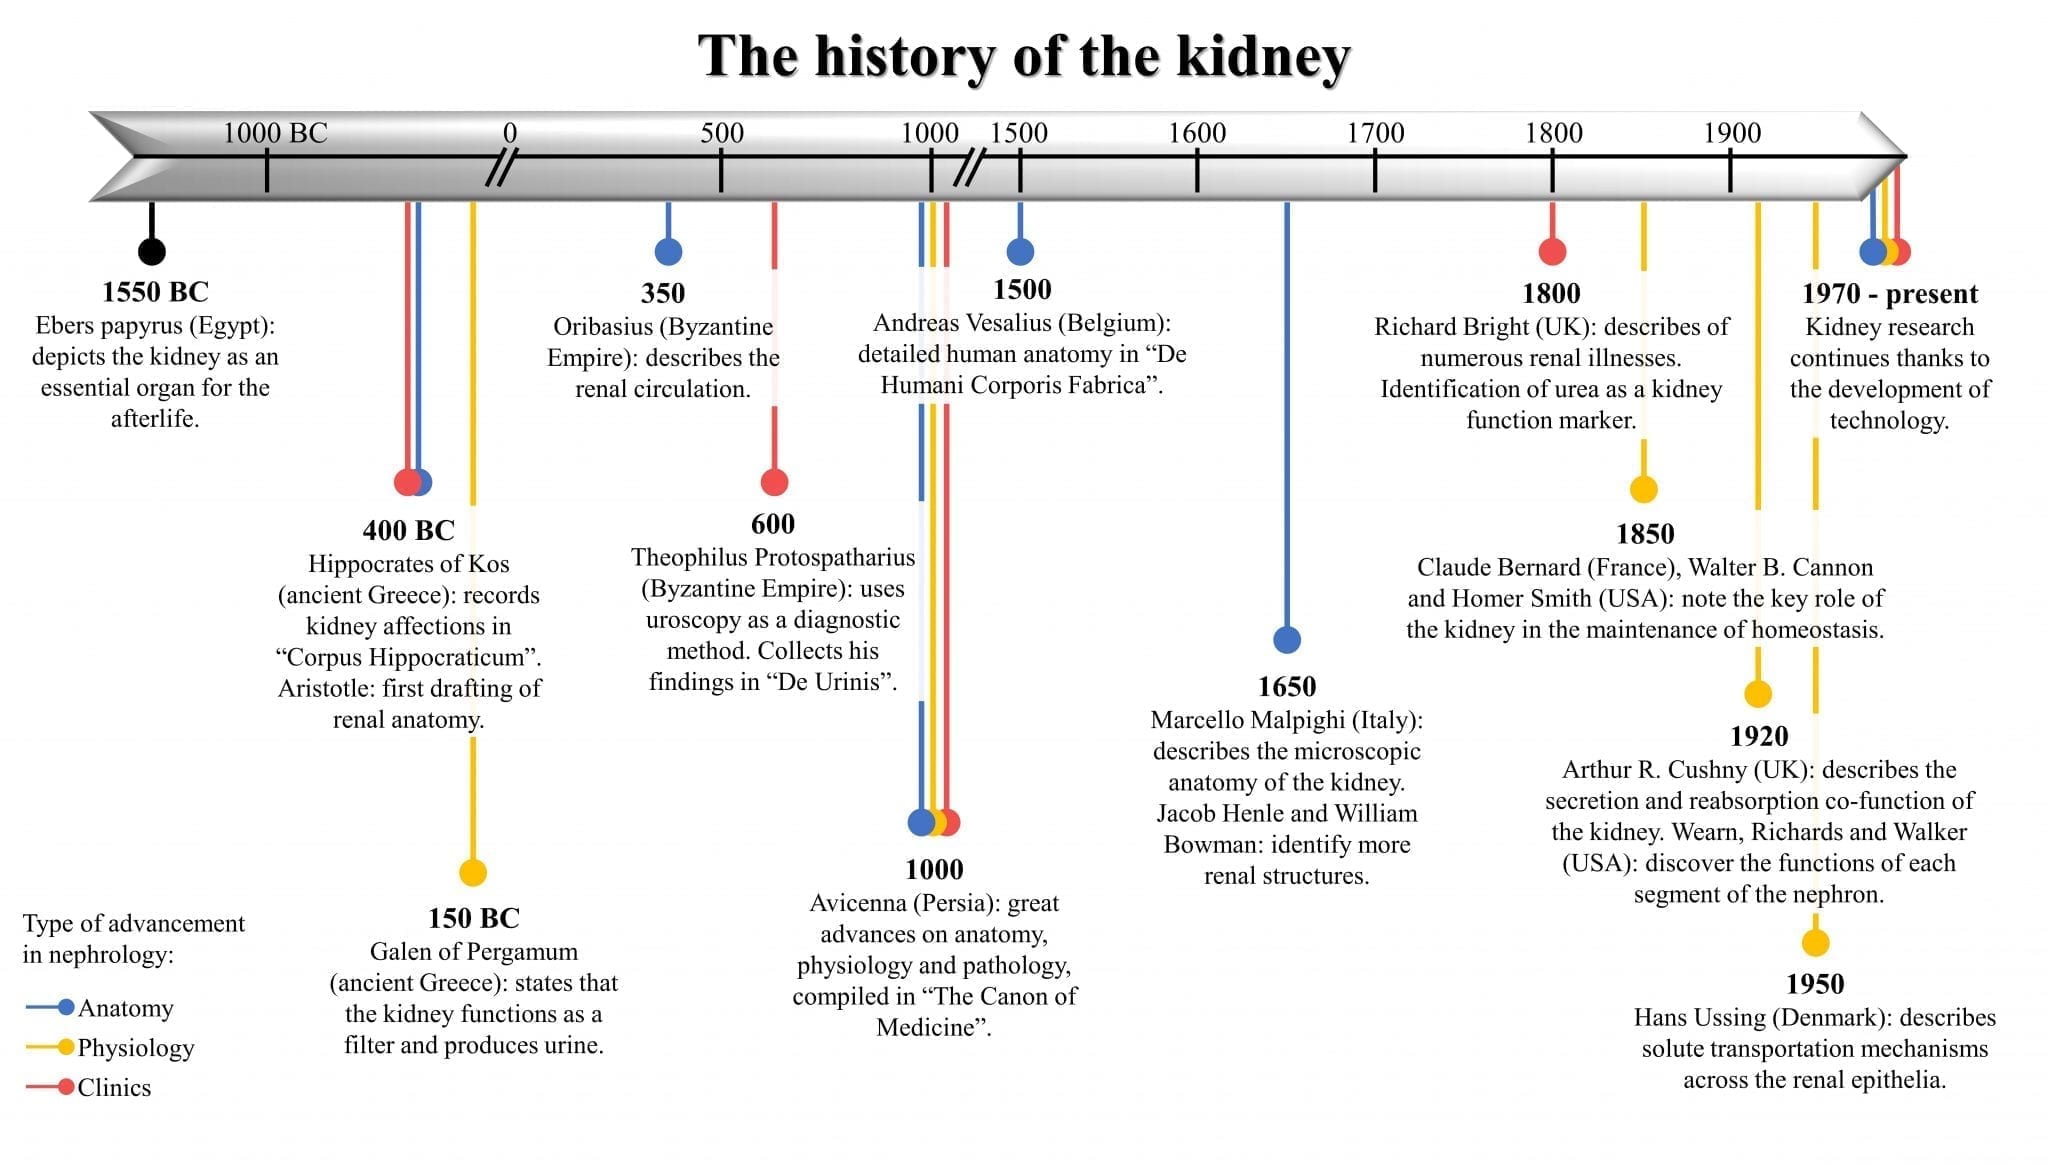 A timeline of the history of the kidney